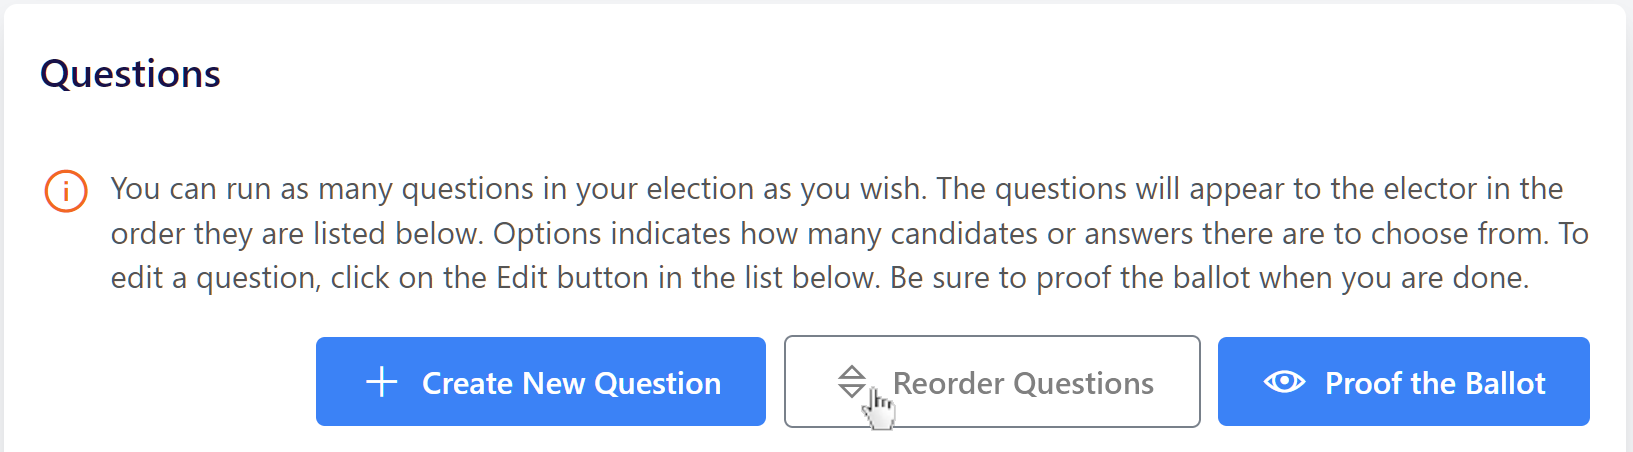 EM_pre_election_reorder_questions_With_proof_button